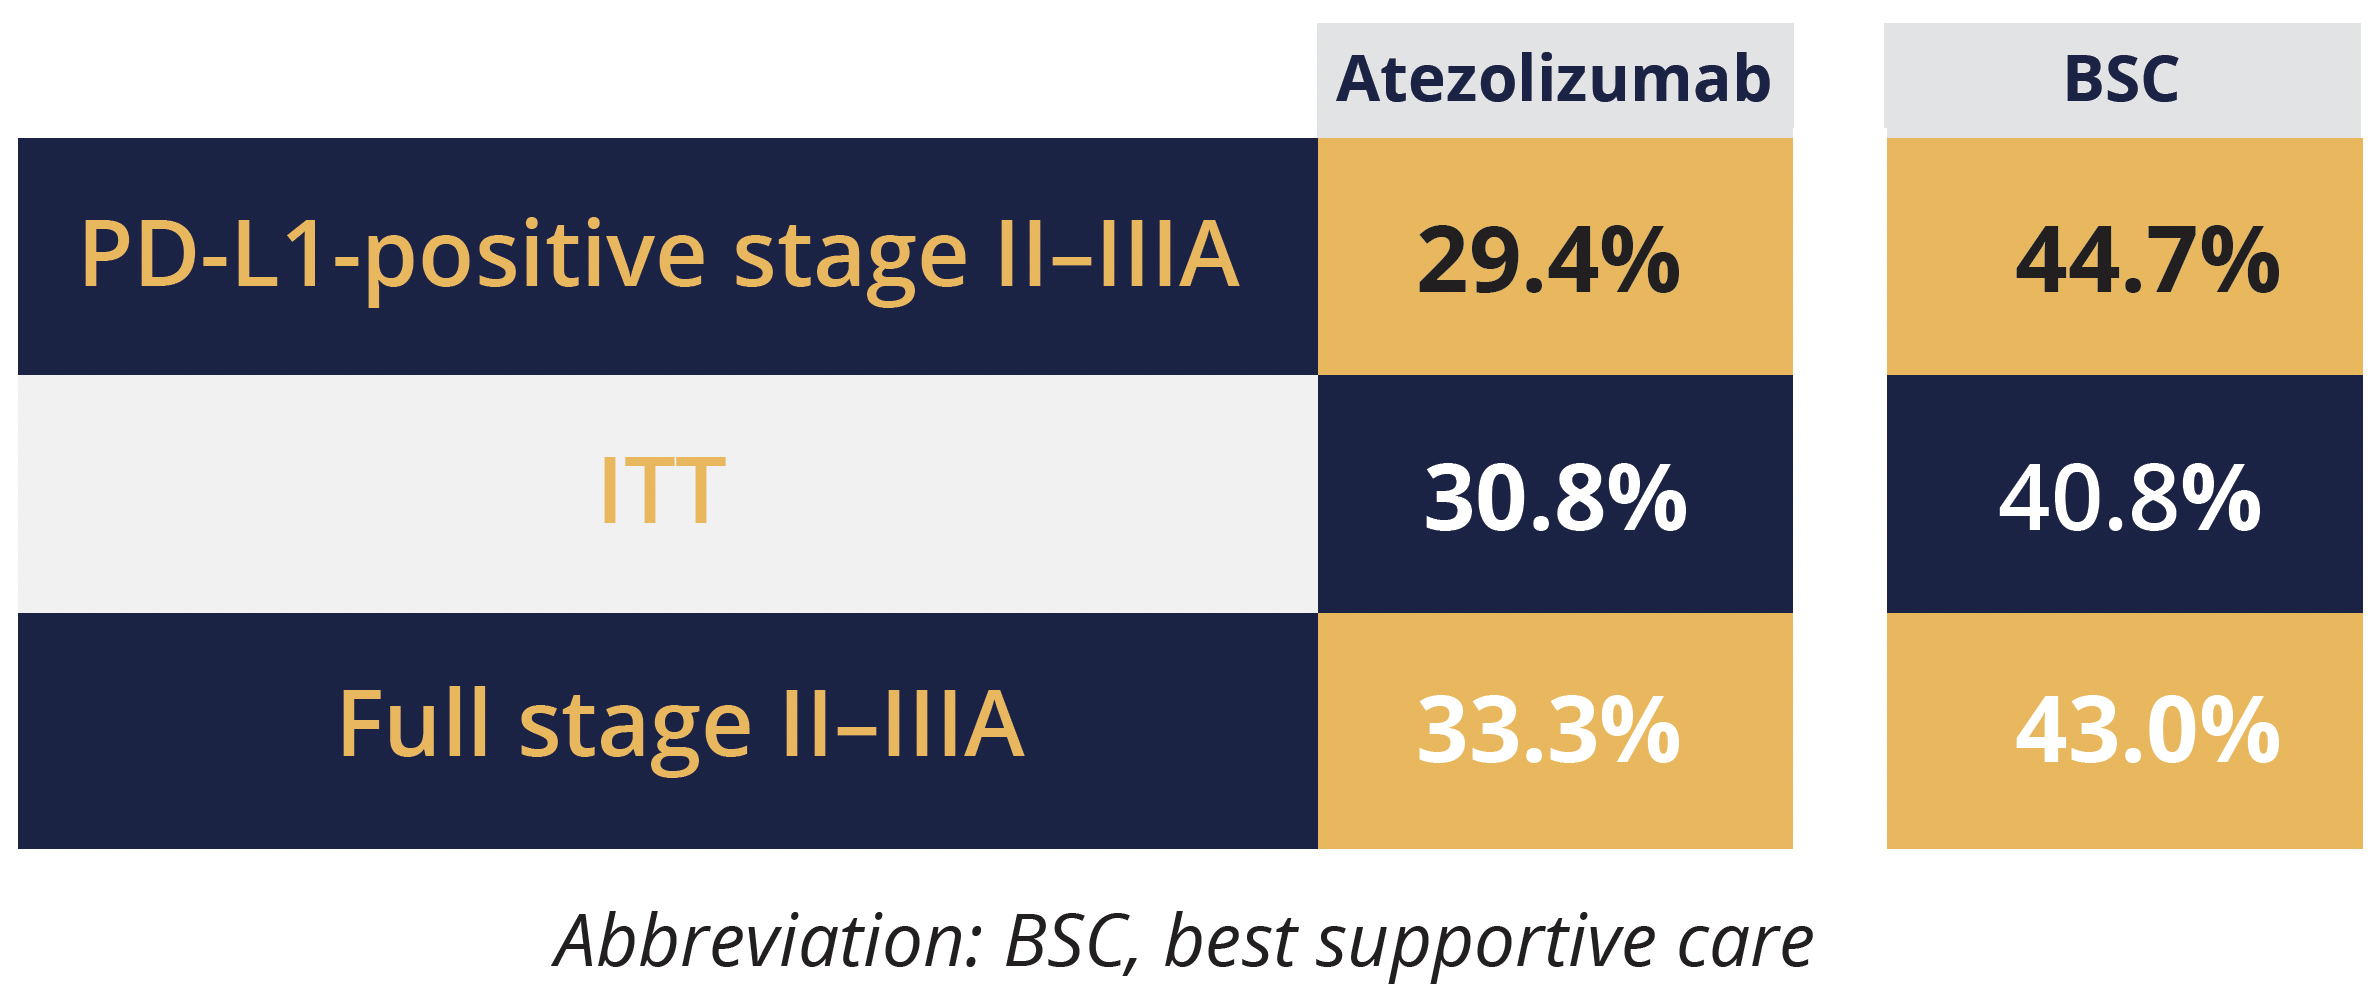 Reduced disease relapse rates in patients receiving atezolizumab versus best supportive care